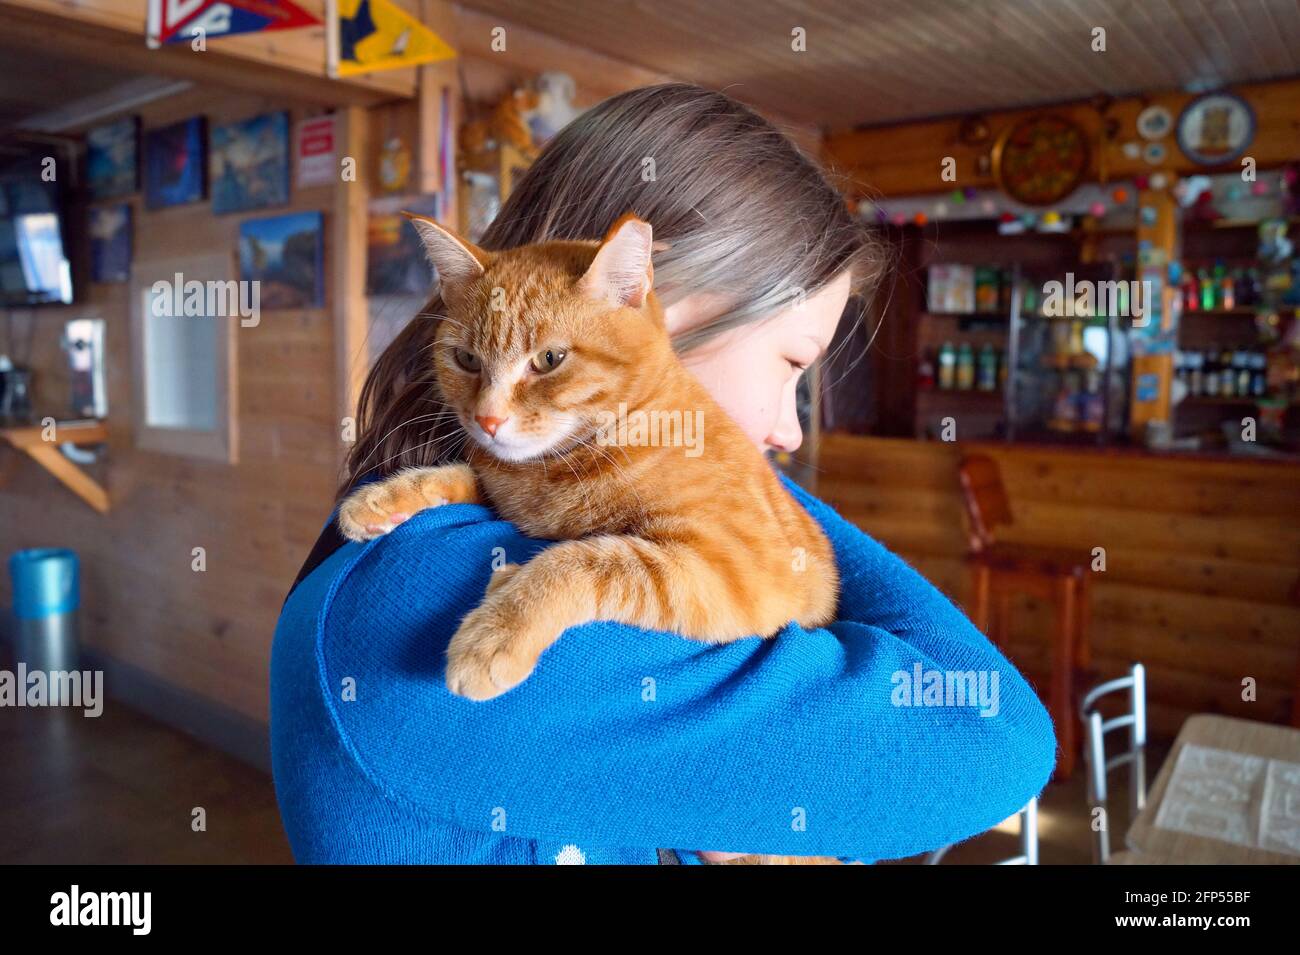 Teenage Girl With Pet Cat High Resolution Stock Photography And Images Alamy